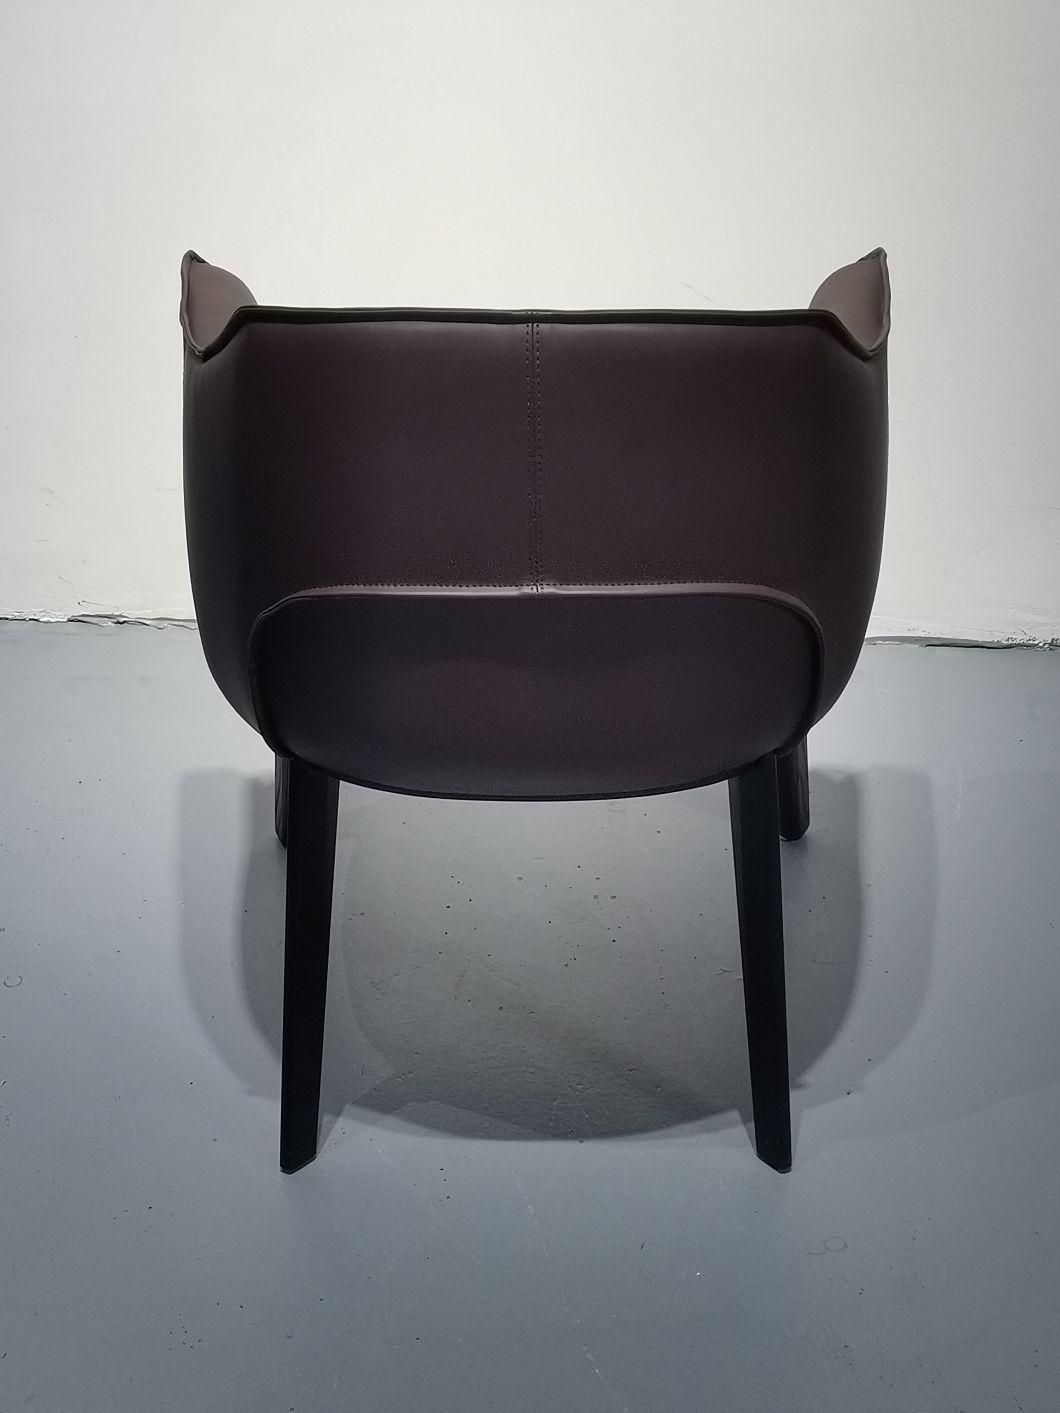 Deluxe Leather or Fabric Upholstery Hotel Bedroom Chair